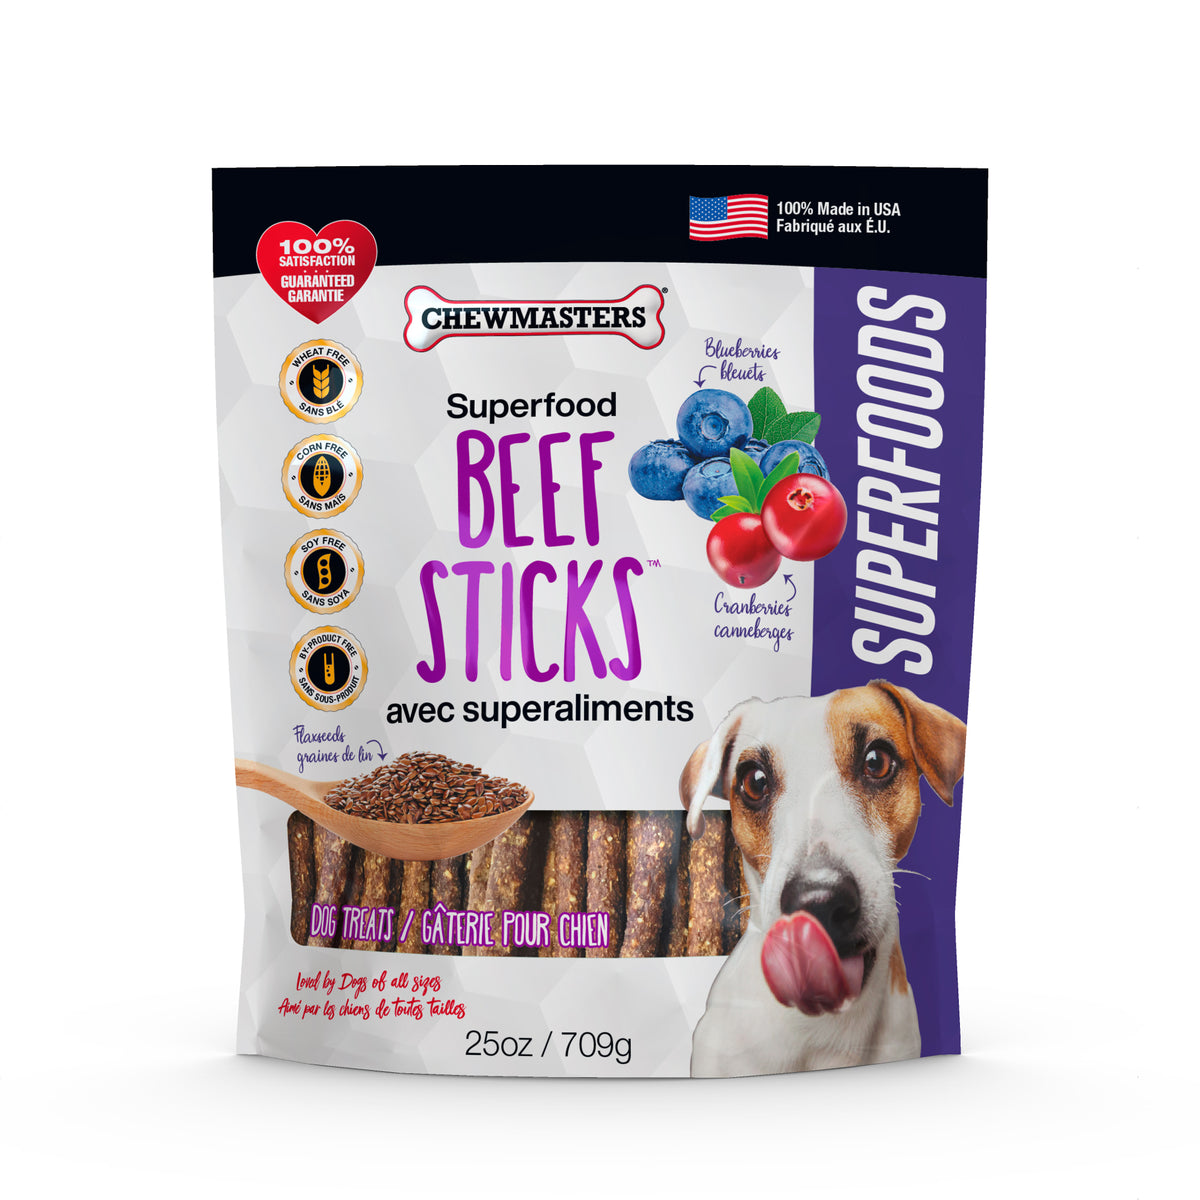 Superfood Beef Sticks - Nutritious and Delicious Dog Treats with Real Beef